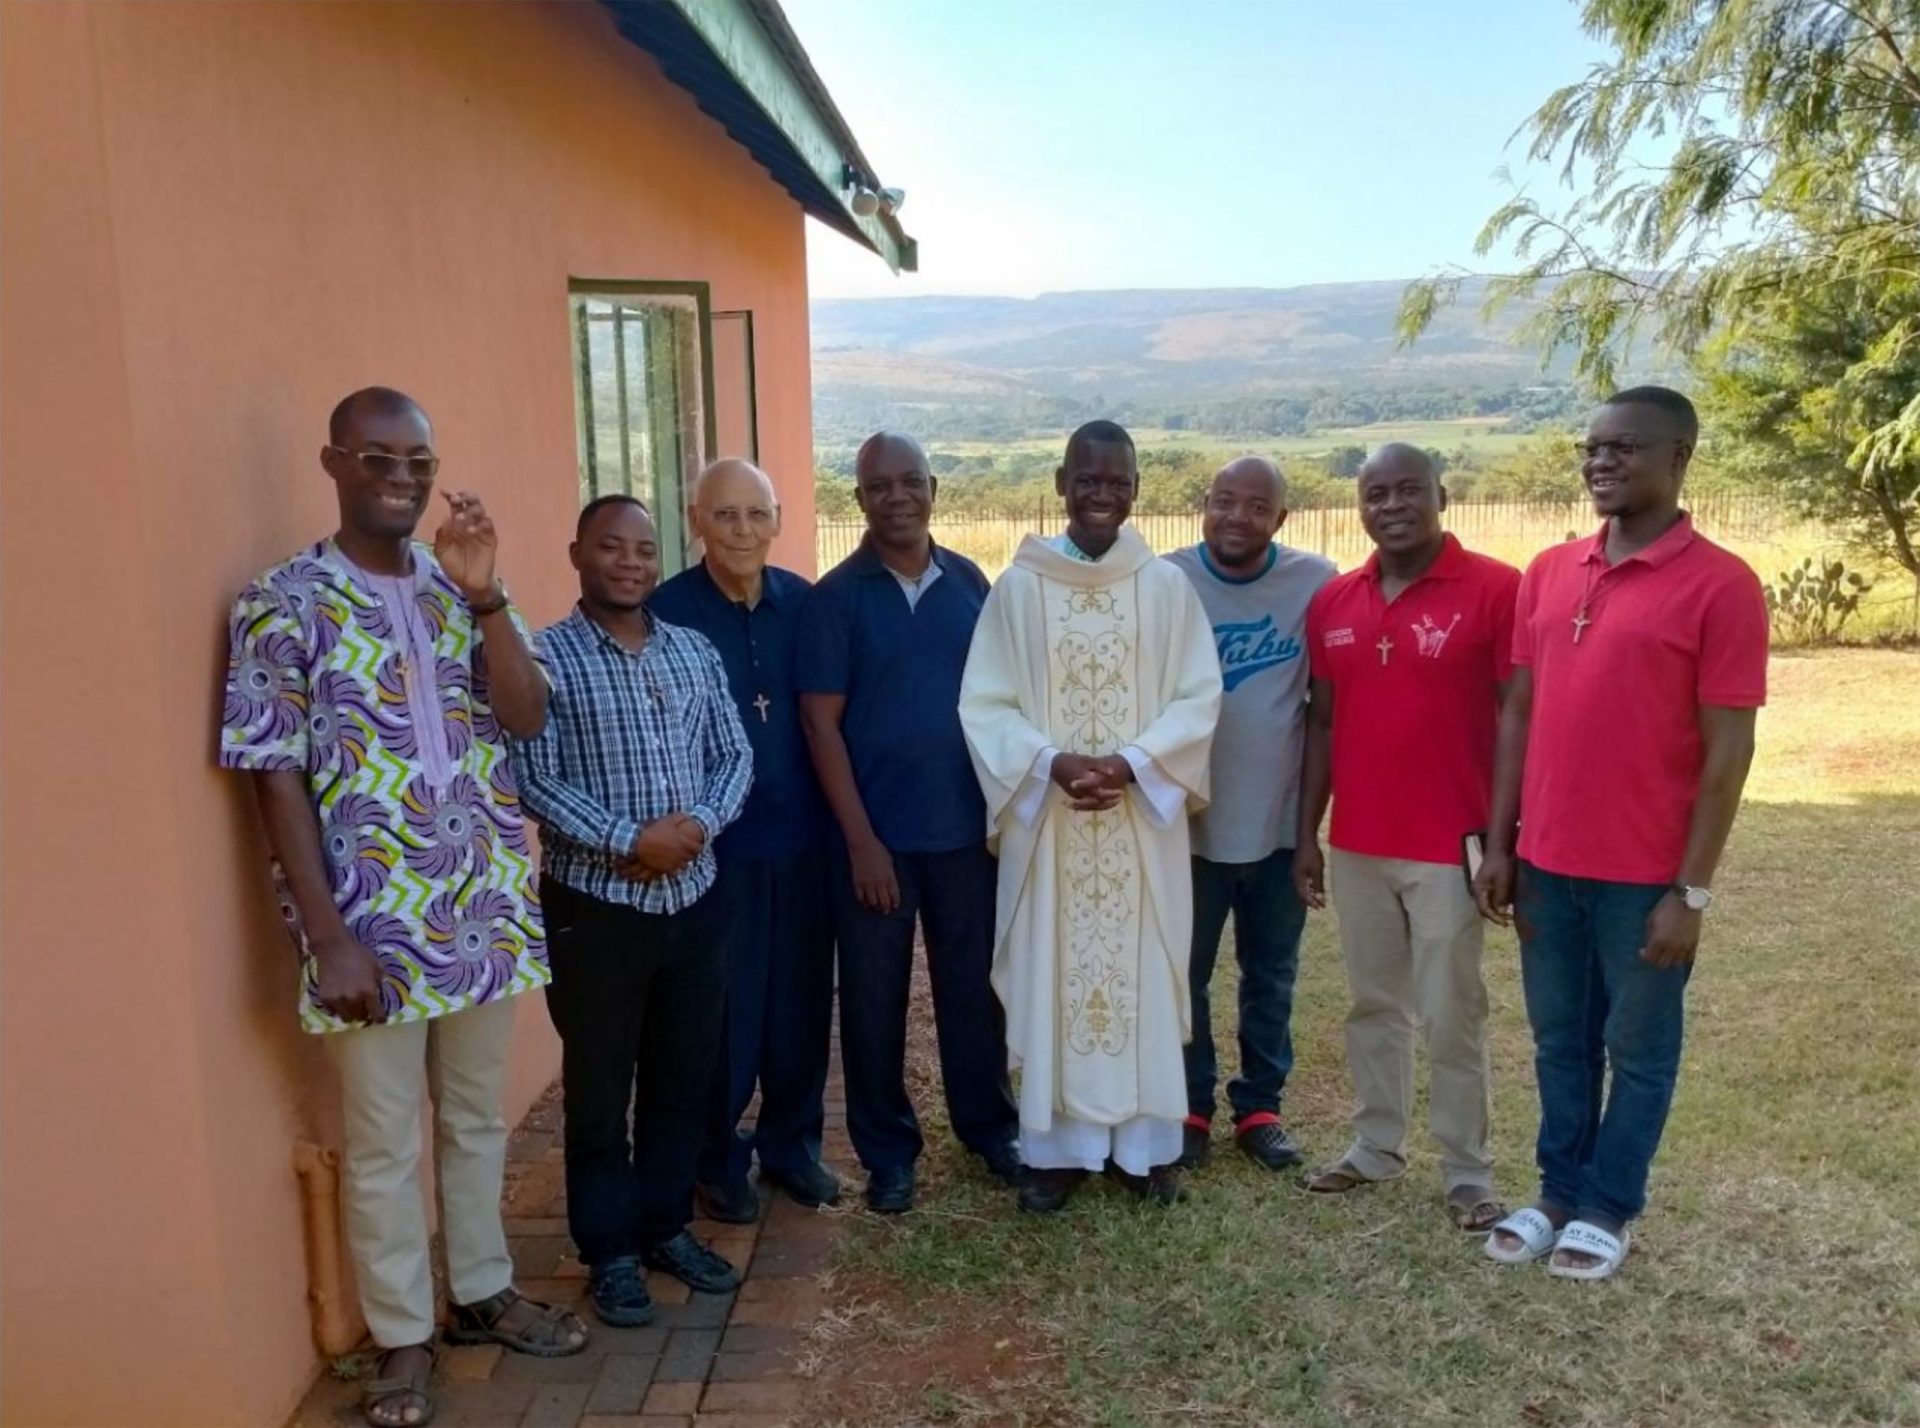 Young Comboni confreres working in the Province of South Africa gathered for
their annual meeting in February at Mooi Nooi in Rustenburg Diocese. Pictured,
from left to right: Fr. Charlemagne Sitou Mawoulomi Dossavi, Manuel Quembo,
Br. Francesco Padovan, Fr. John Baptist Keraryo Opargiw, Fr. Ronald Alionzi, Fr.
Kifle Kirba, Fr. Robert Ndungu, and Fr. Prosper Tehou.